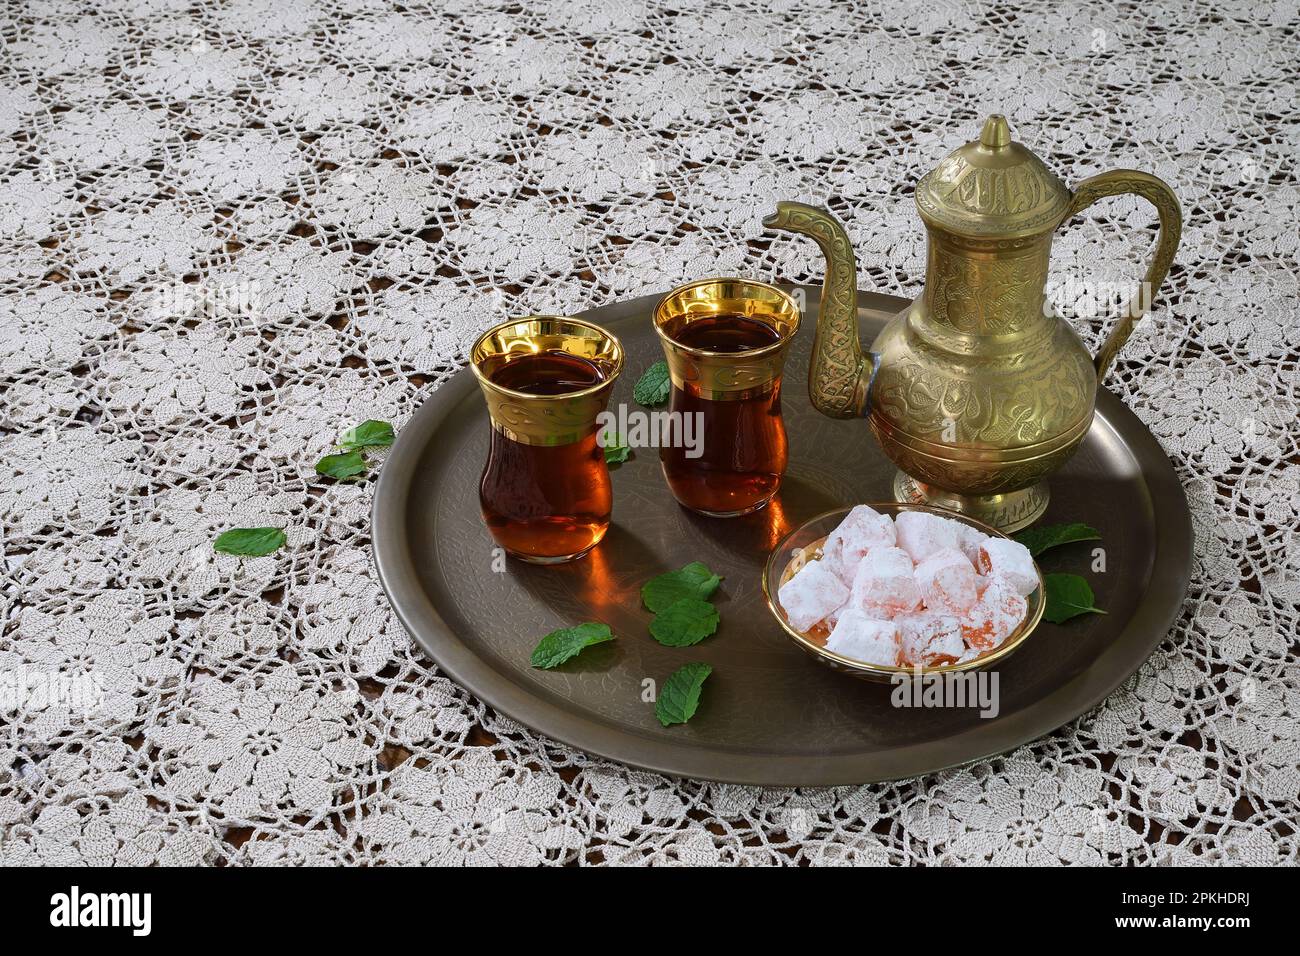 A classic, celebratory, ornate Turkish teapot, two glasses and traditional turkish delights on a tray and white lace tablecloth in soft lighting Stock Photo